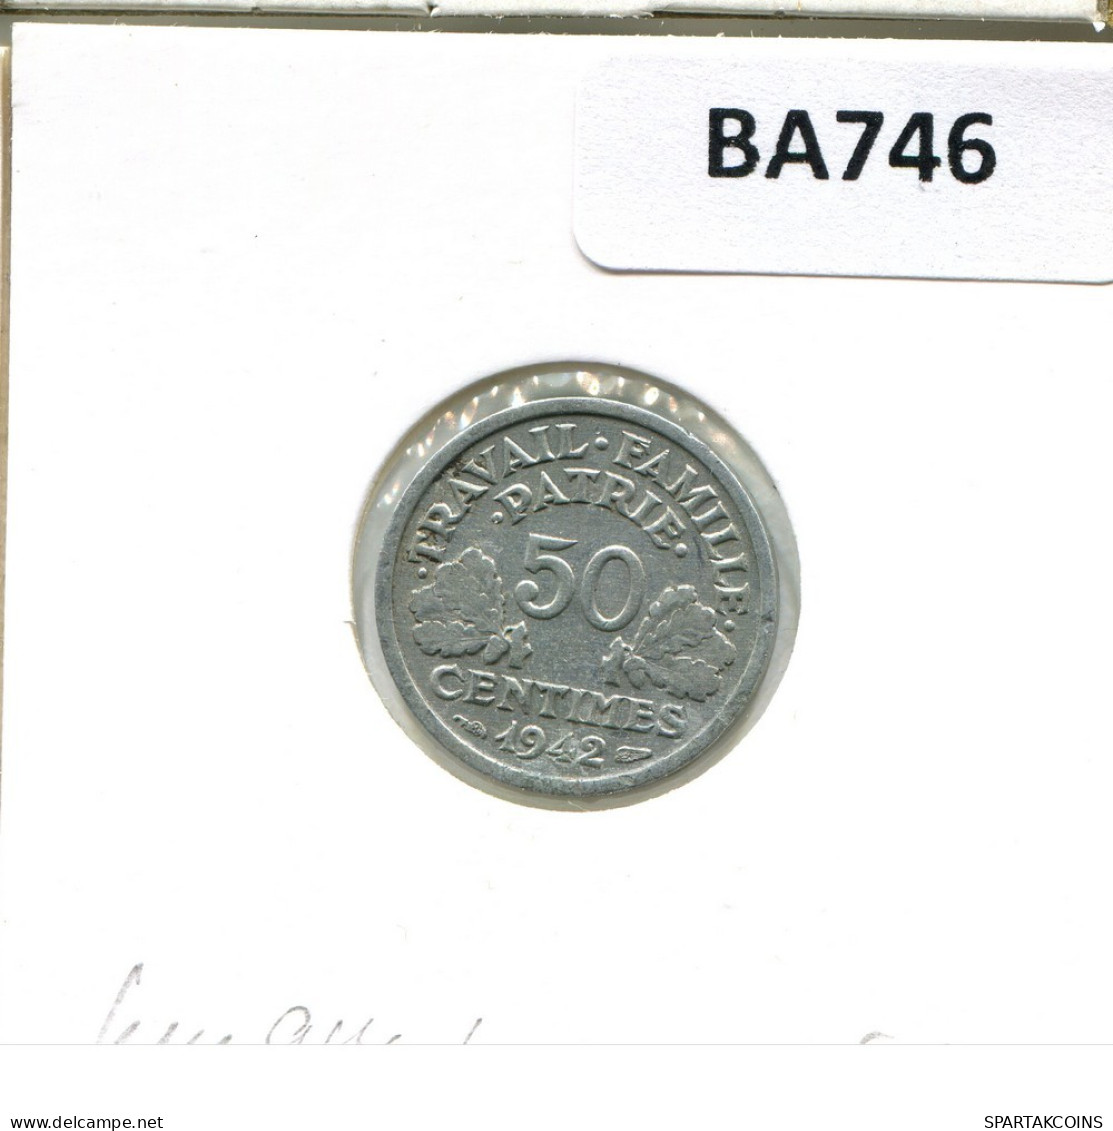 50 CENTIMES 1942 FRANCE French Coin #BA746.U.A - 50 Centimes